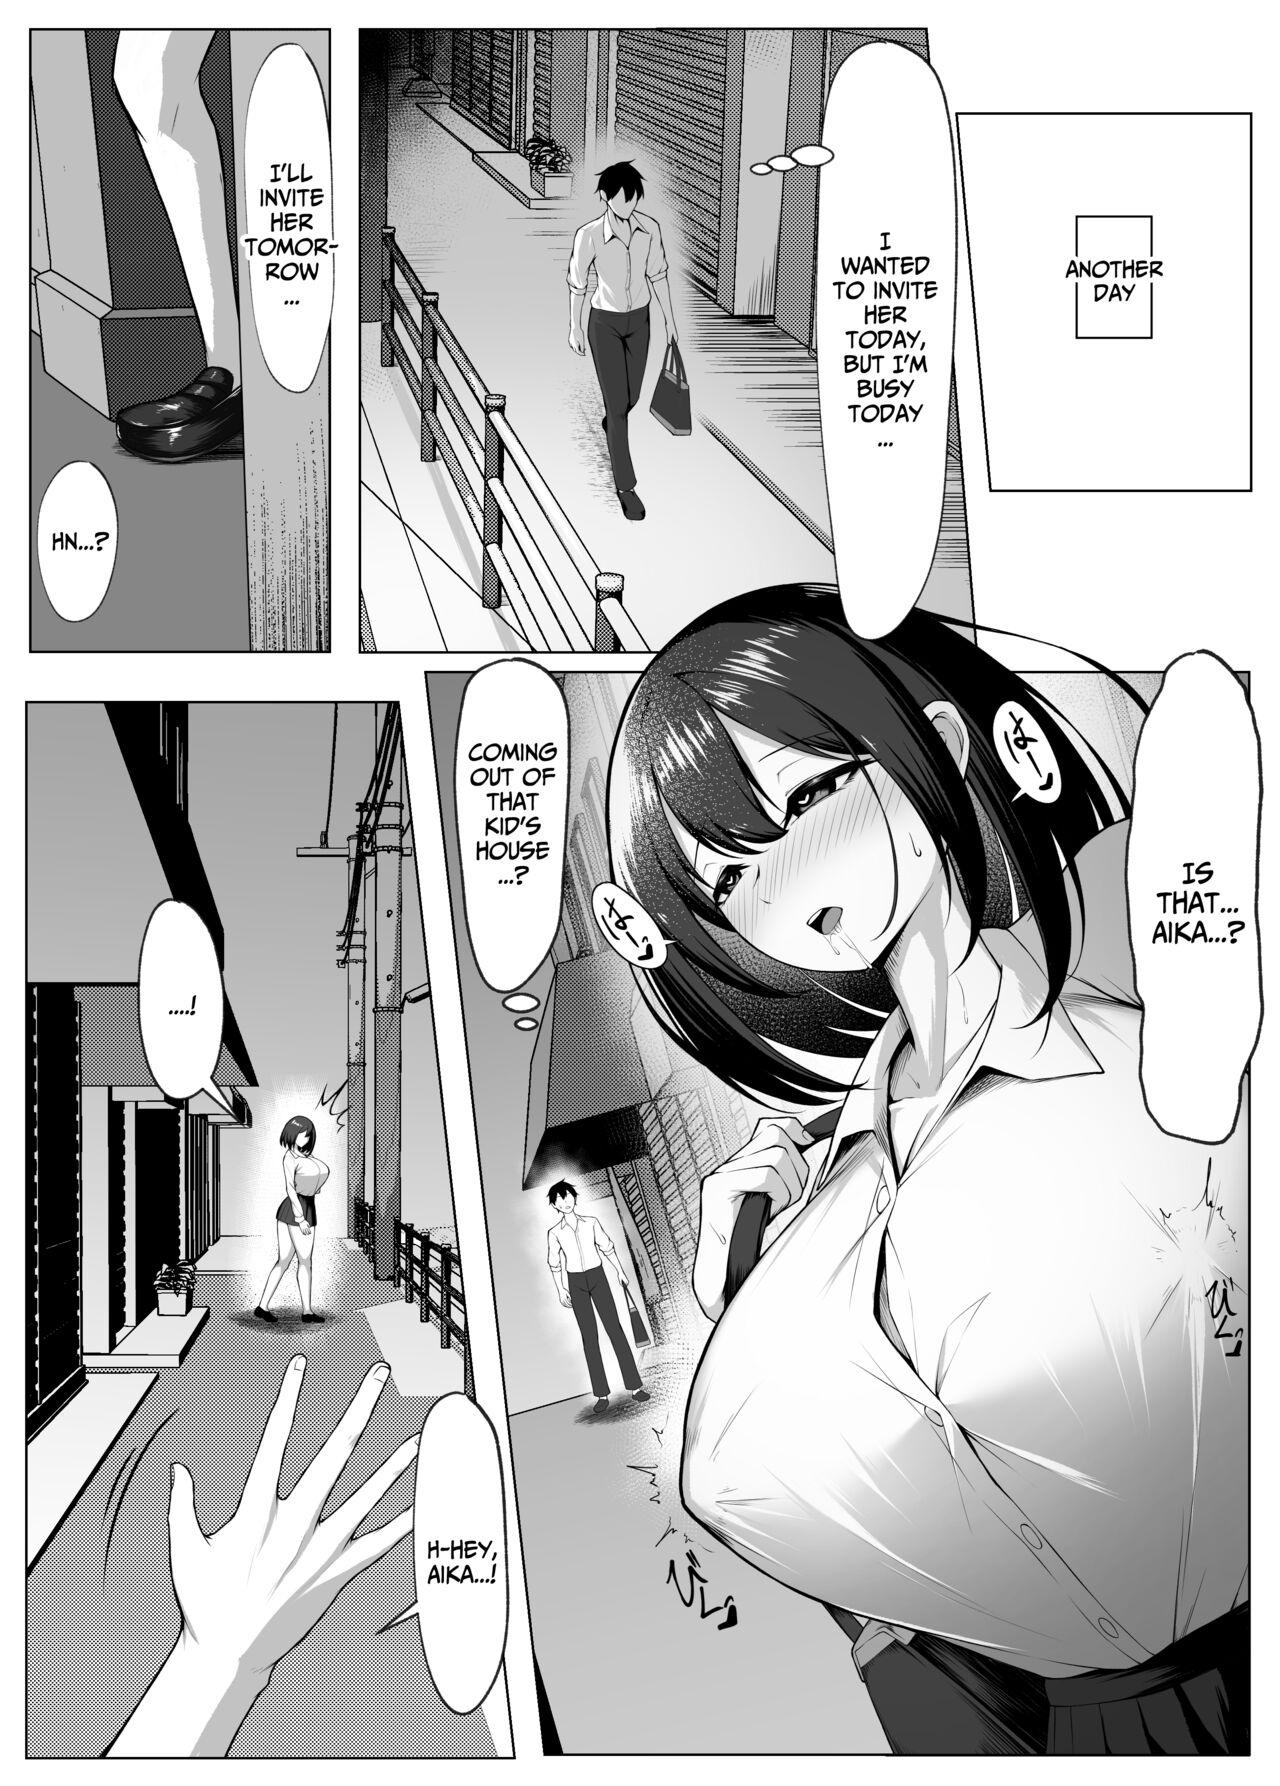 First Time My Clumsy Childhood Friend is Being Turned into a Sex Doll by Horny Brats Her - Page 6